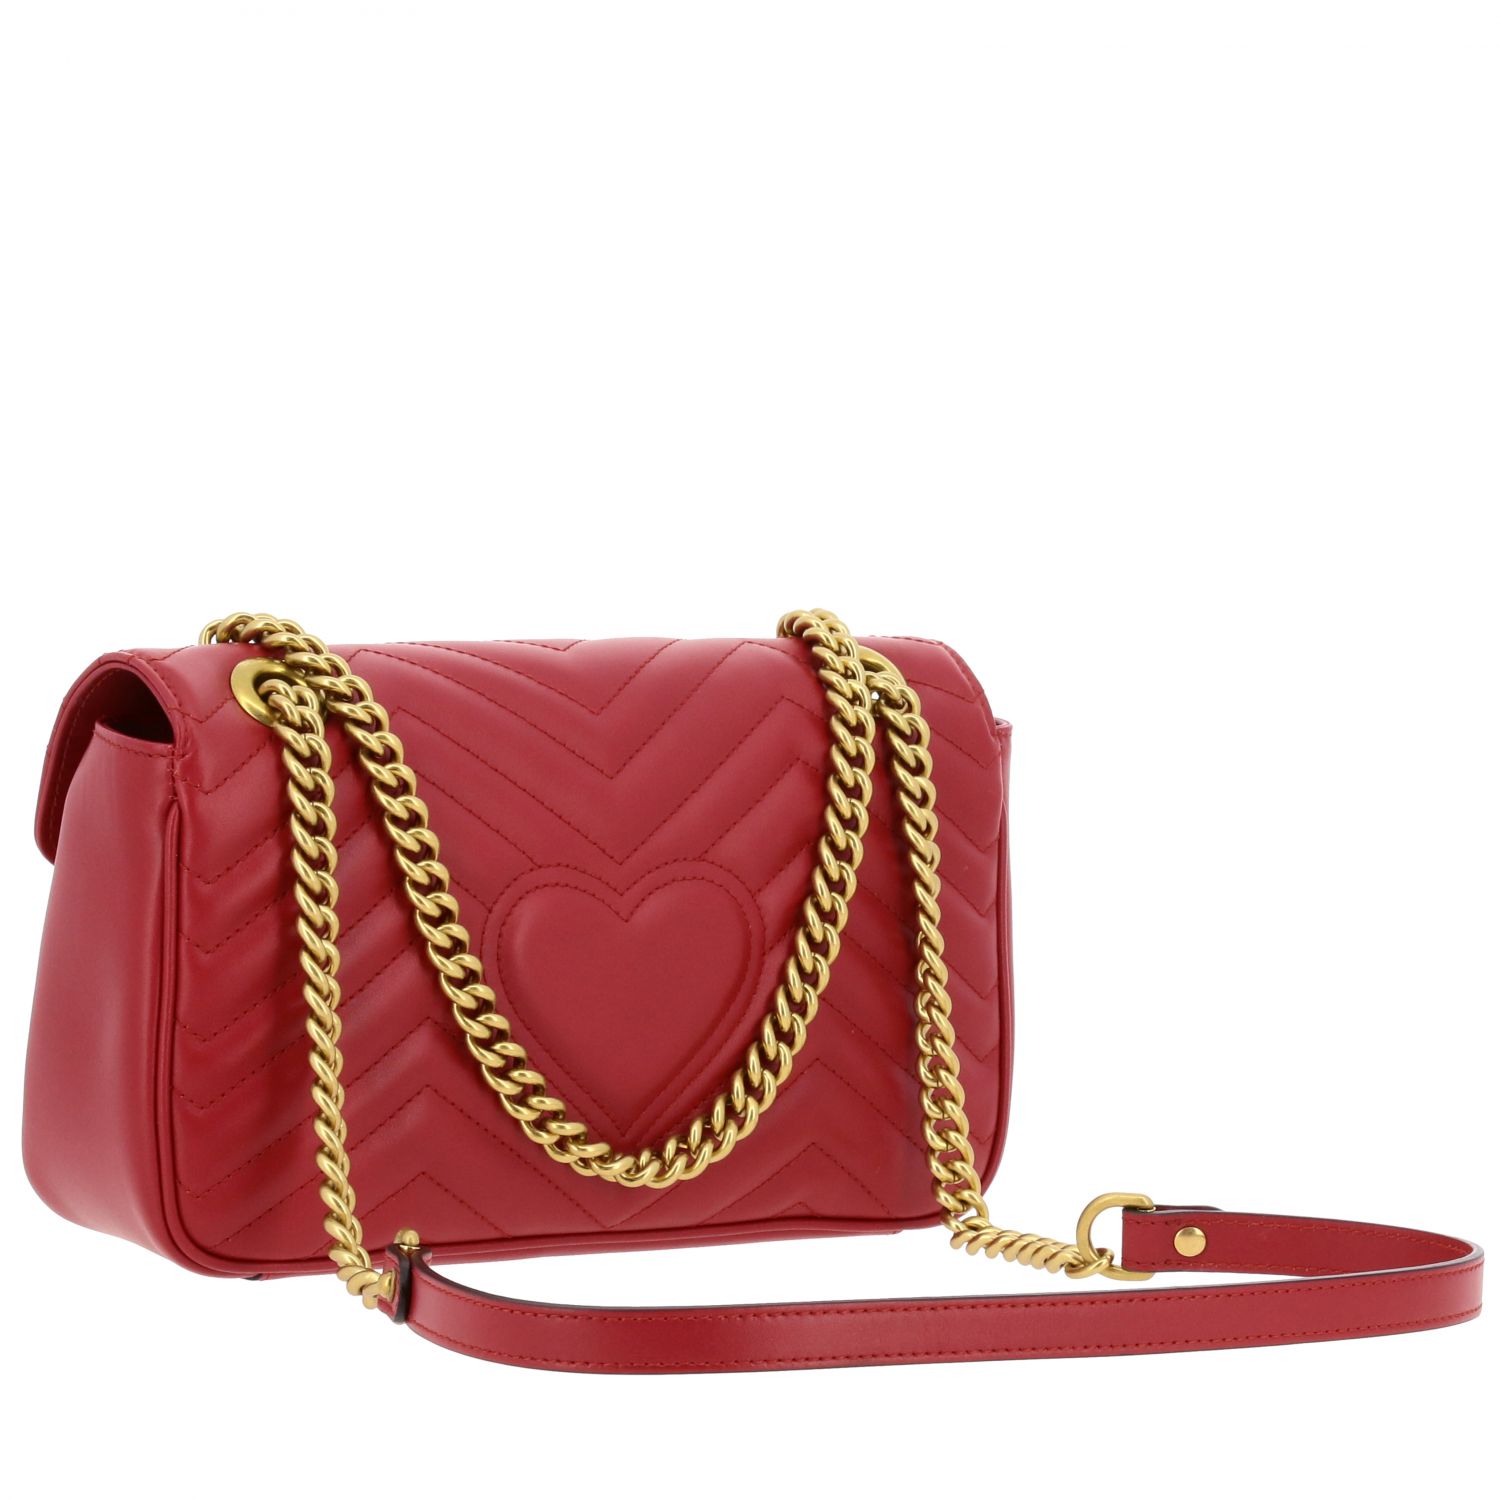 GUCCI: Marmont shoulder bag in chevron leather with monogram ...